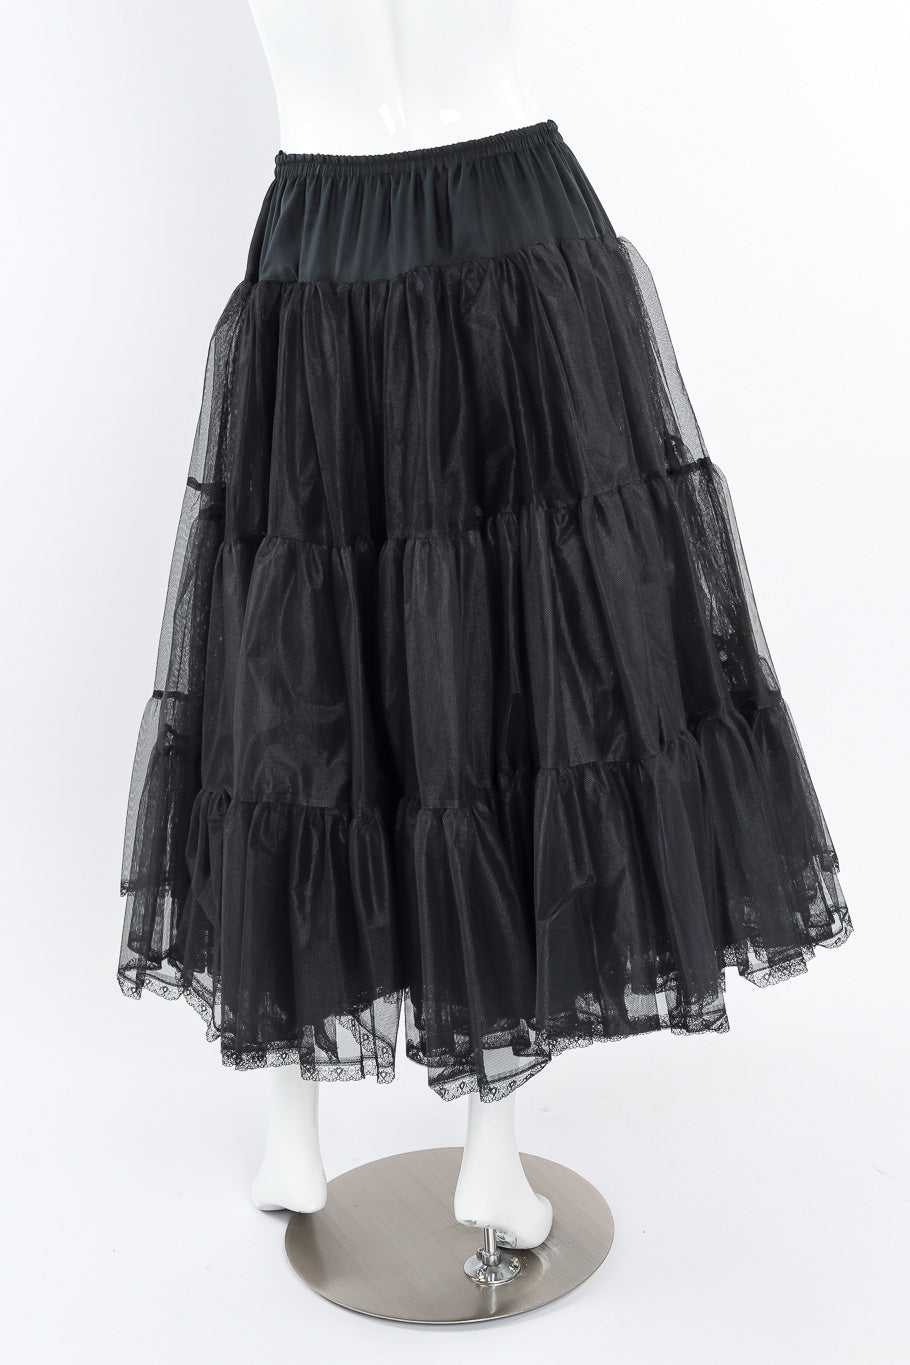 Petticoat skirt by Morgane Le Fay on mannequin back @recessla